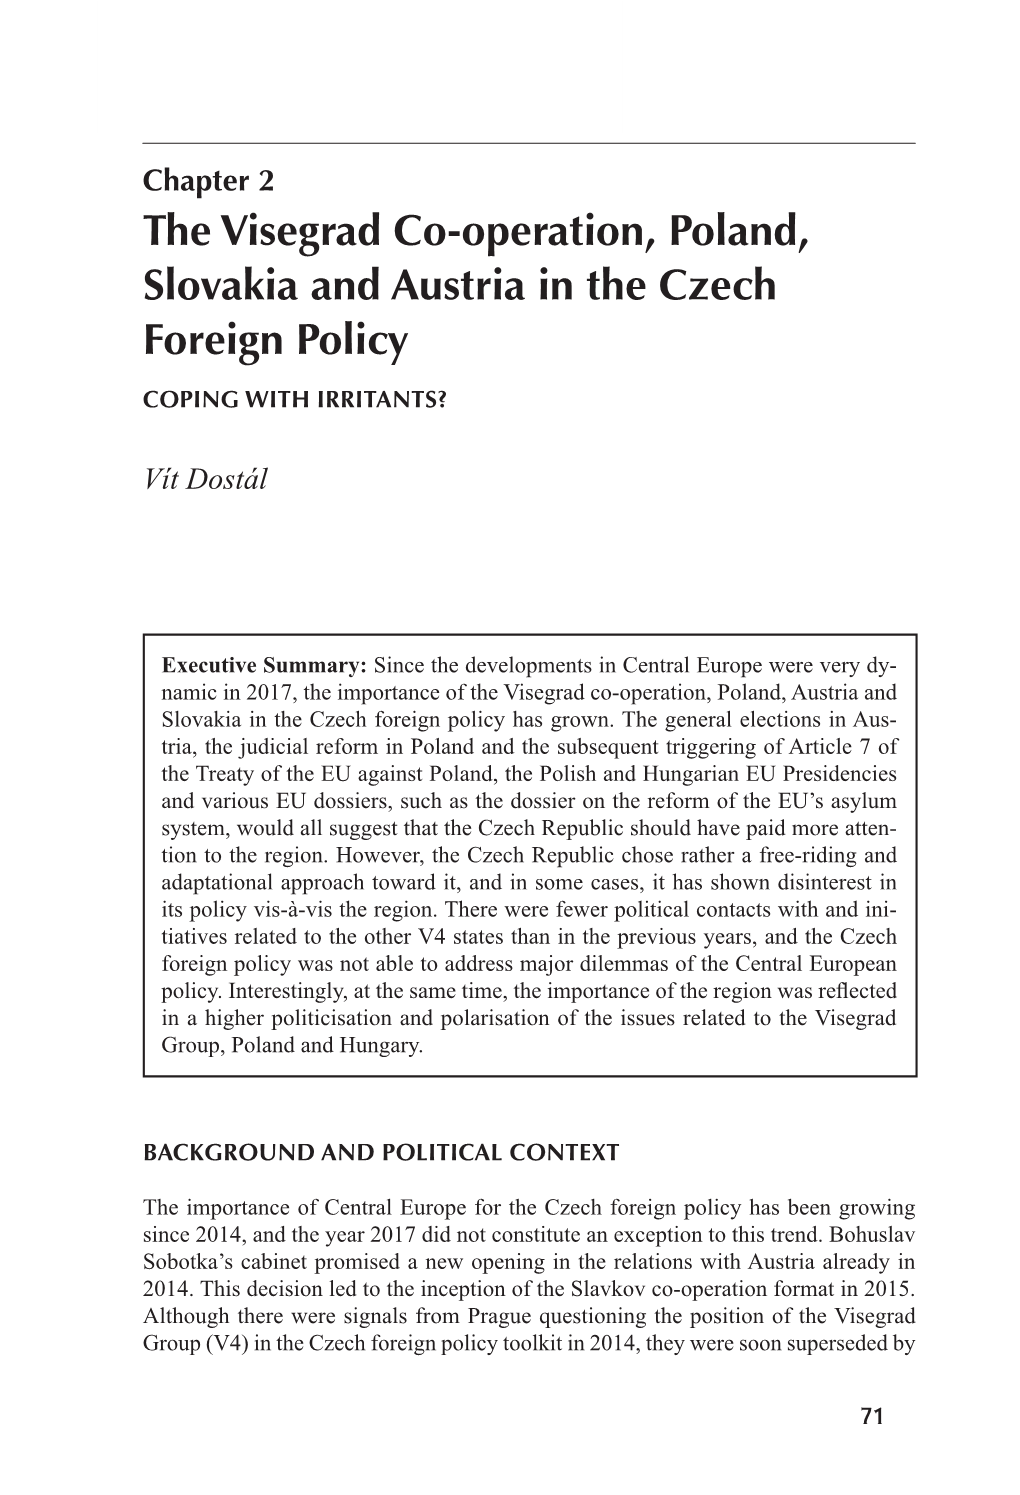 The Visegrad Co-Operation, Poland, Slovakia and Austria in the Czech Foreign Policy